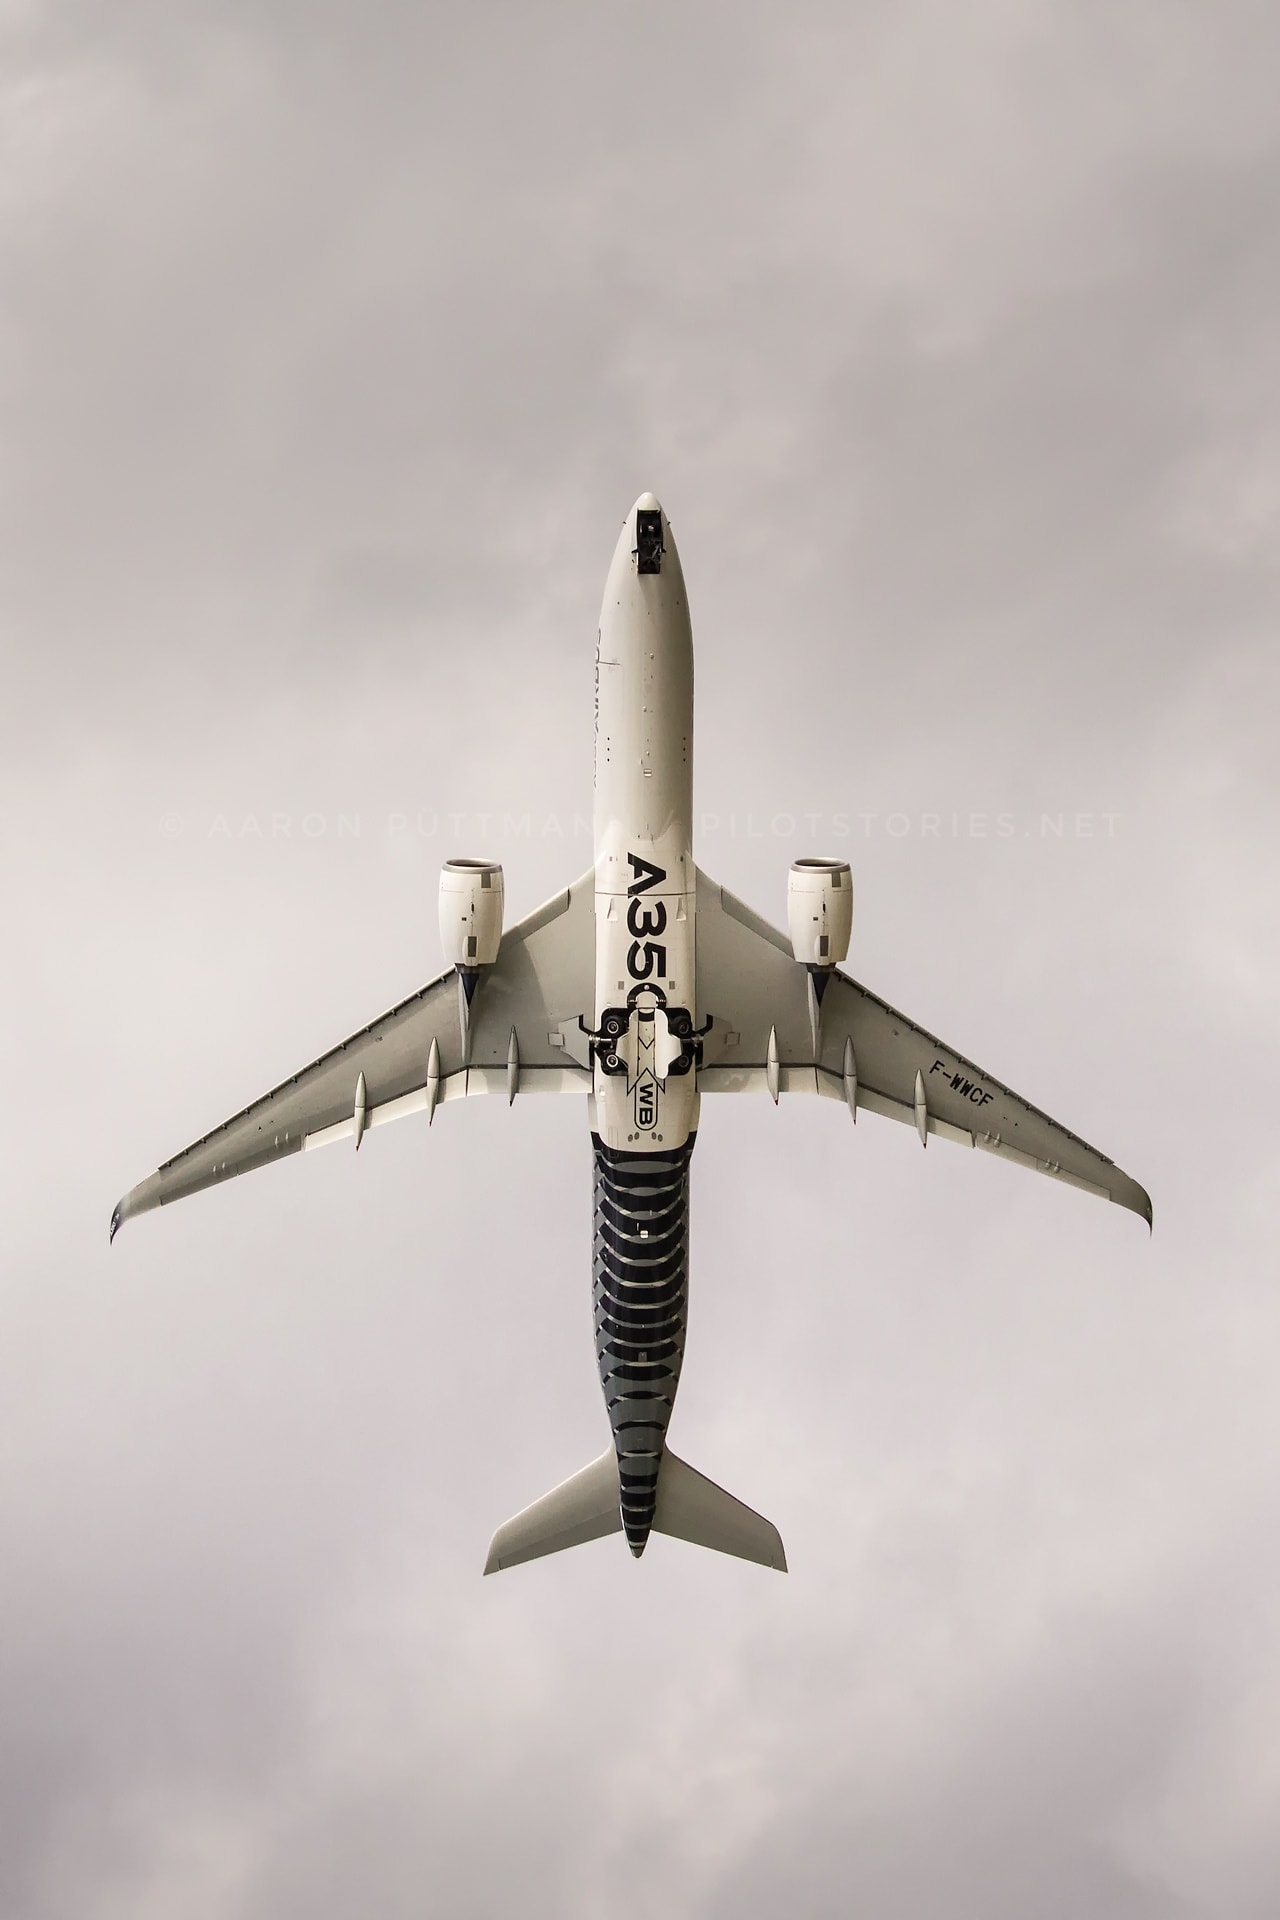 Aircraft wallpapers for your smartphone full